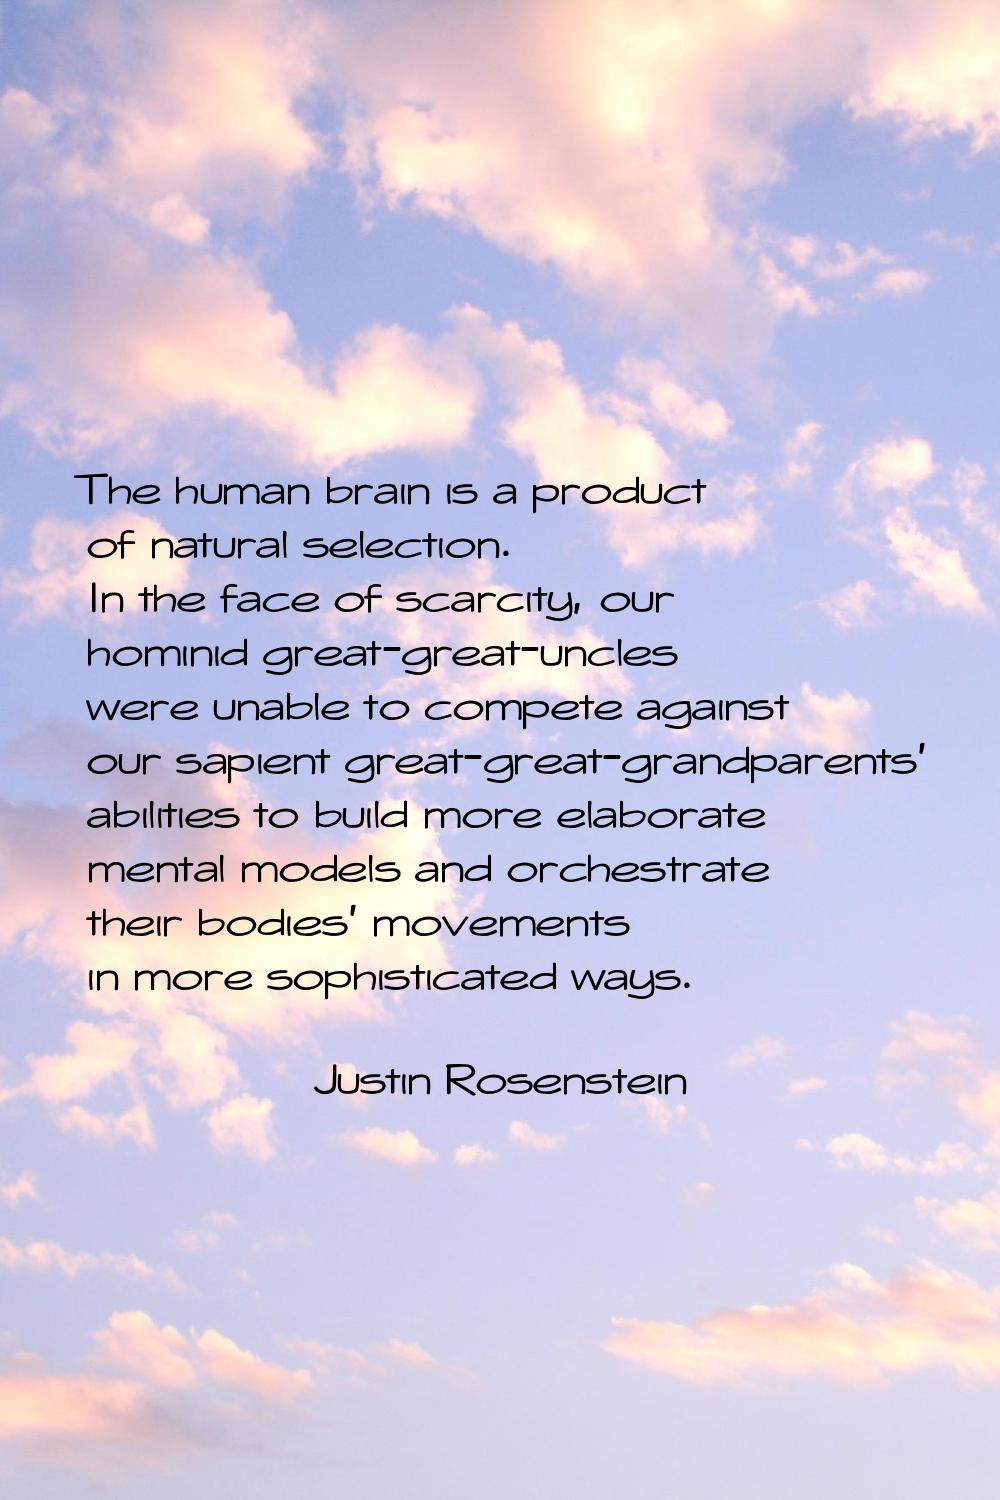 The human brain is a product of natural selection. In the face of scarcity, our hominid great-great